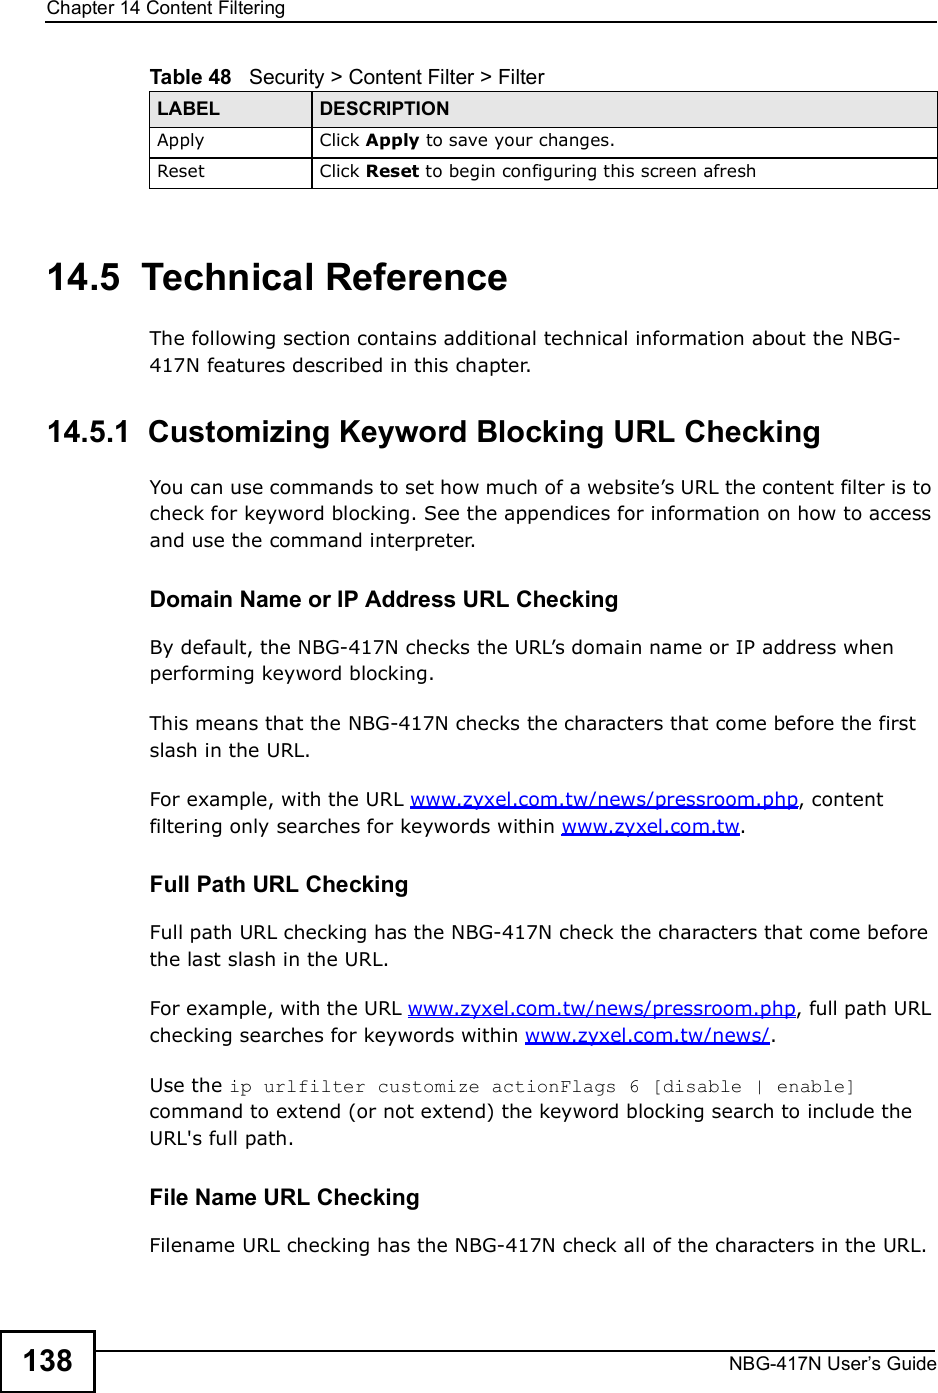 Chapter 14Content FilteringNBG-417N User s Guide13814.5  Technical ReferenceThe following section contains additional technical information about the NBG-417N features described in this chapter.14.5.1  Customizing Keyword Blocking URL CheckingYou can use commands to set how much of a website!s URL the content filter is to check for keyword blocking. See the appendices for information on how to access and use the command interpreter.Domain Name or IP Address URL CheckingBy default, the NBG-417N checks the URL!s domain name or IP address when performing keyword blocking.This means that the NBG-417N checks the characters that come before the first slash in the URL.For example, with the URL www.zyxel.com.tw/news/pressroom.php, content filtering only searches for keywords within www.zyxel.com.tw.Full Path URL CheckingFull path URL checking has the NBG-417N check the characters that come before the last slash in the URL.For example, with the URL www.zyxel.com.tw/news/pressroom.php, full path URL checking searches for keywords within www.zyxel.com.tw/news/.Use the ip urlfilter customize actionFlags 6 [disable | enable] command to extend (or not extend) the keyword blocking search to include the URL&apos;s full path.File Name URL CheckingFilename URL checking has the NBG-417N check all of the characters in the URL.Apply Click Apply to save your changes.Reset Click Reset to begin configuring this screen afreshTable 48   Security &gt; Content Filter &gt; FilterLABEL DESCRIPTION